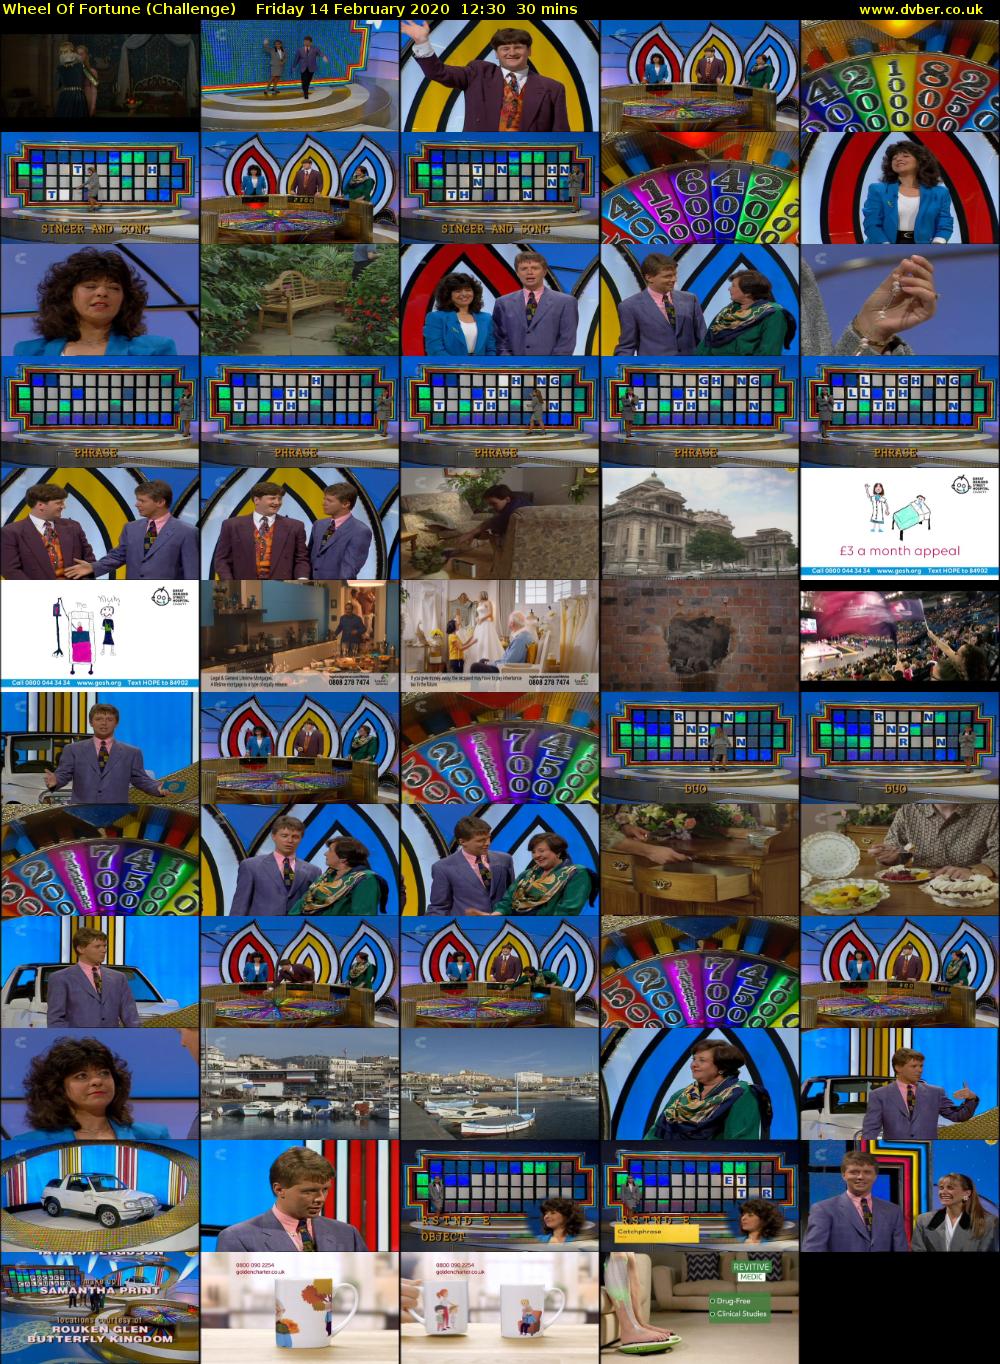 Wheel Of Fortune (Challenge) Friday 14 February 2020 12:30 - 13:00